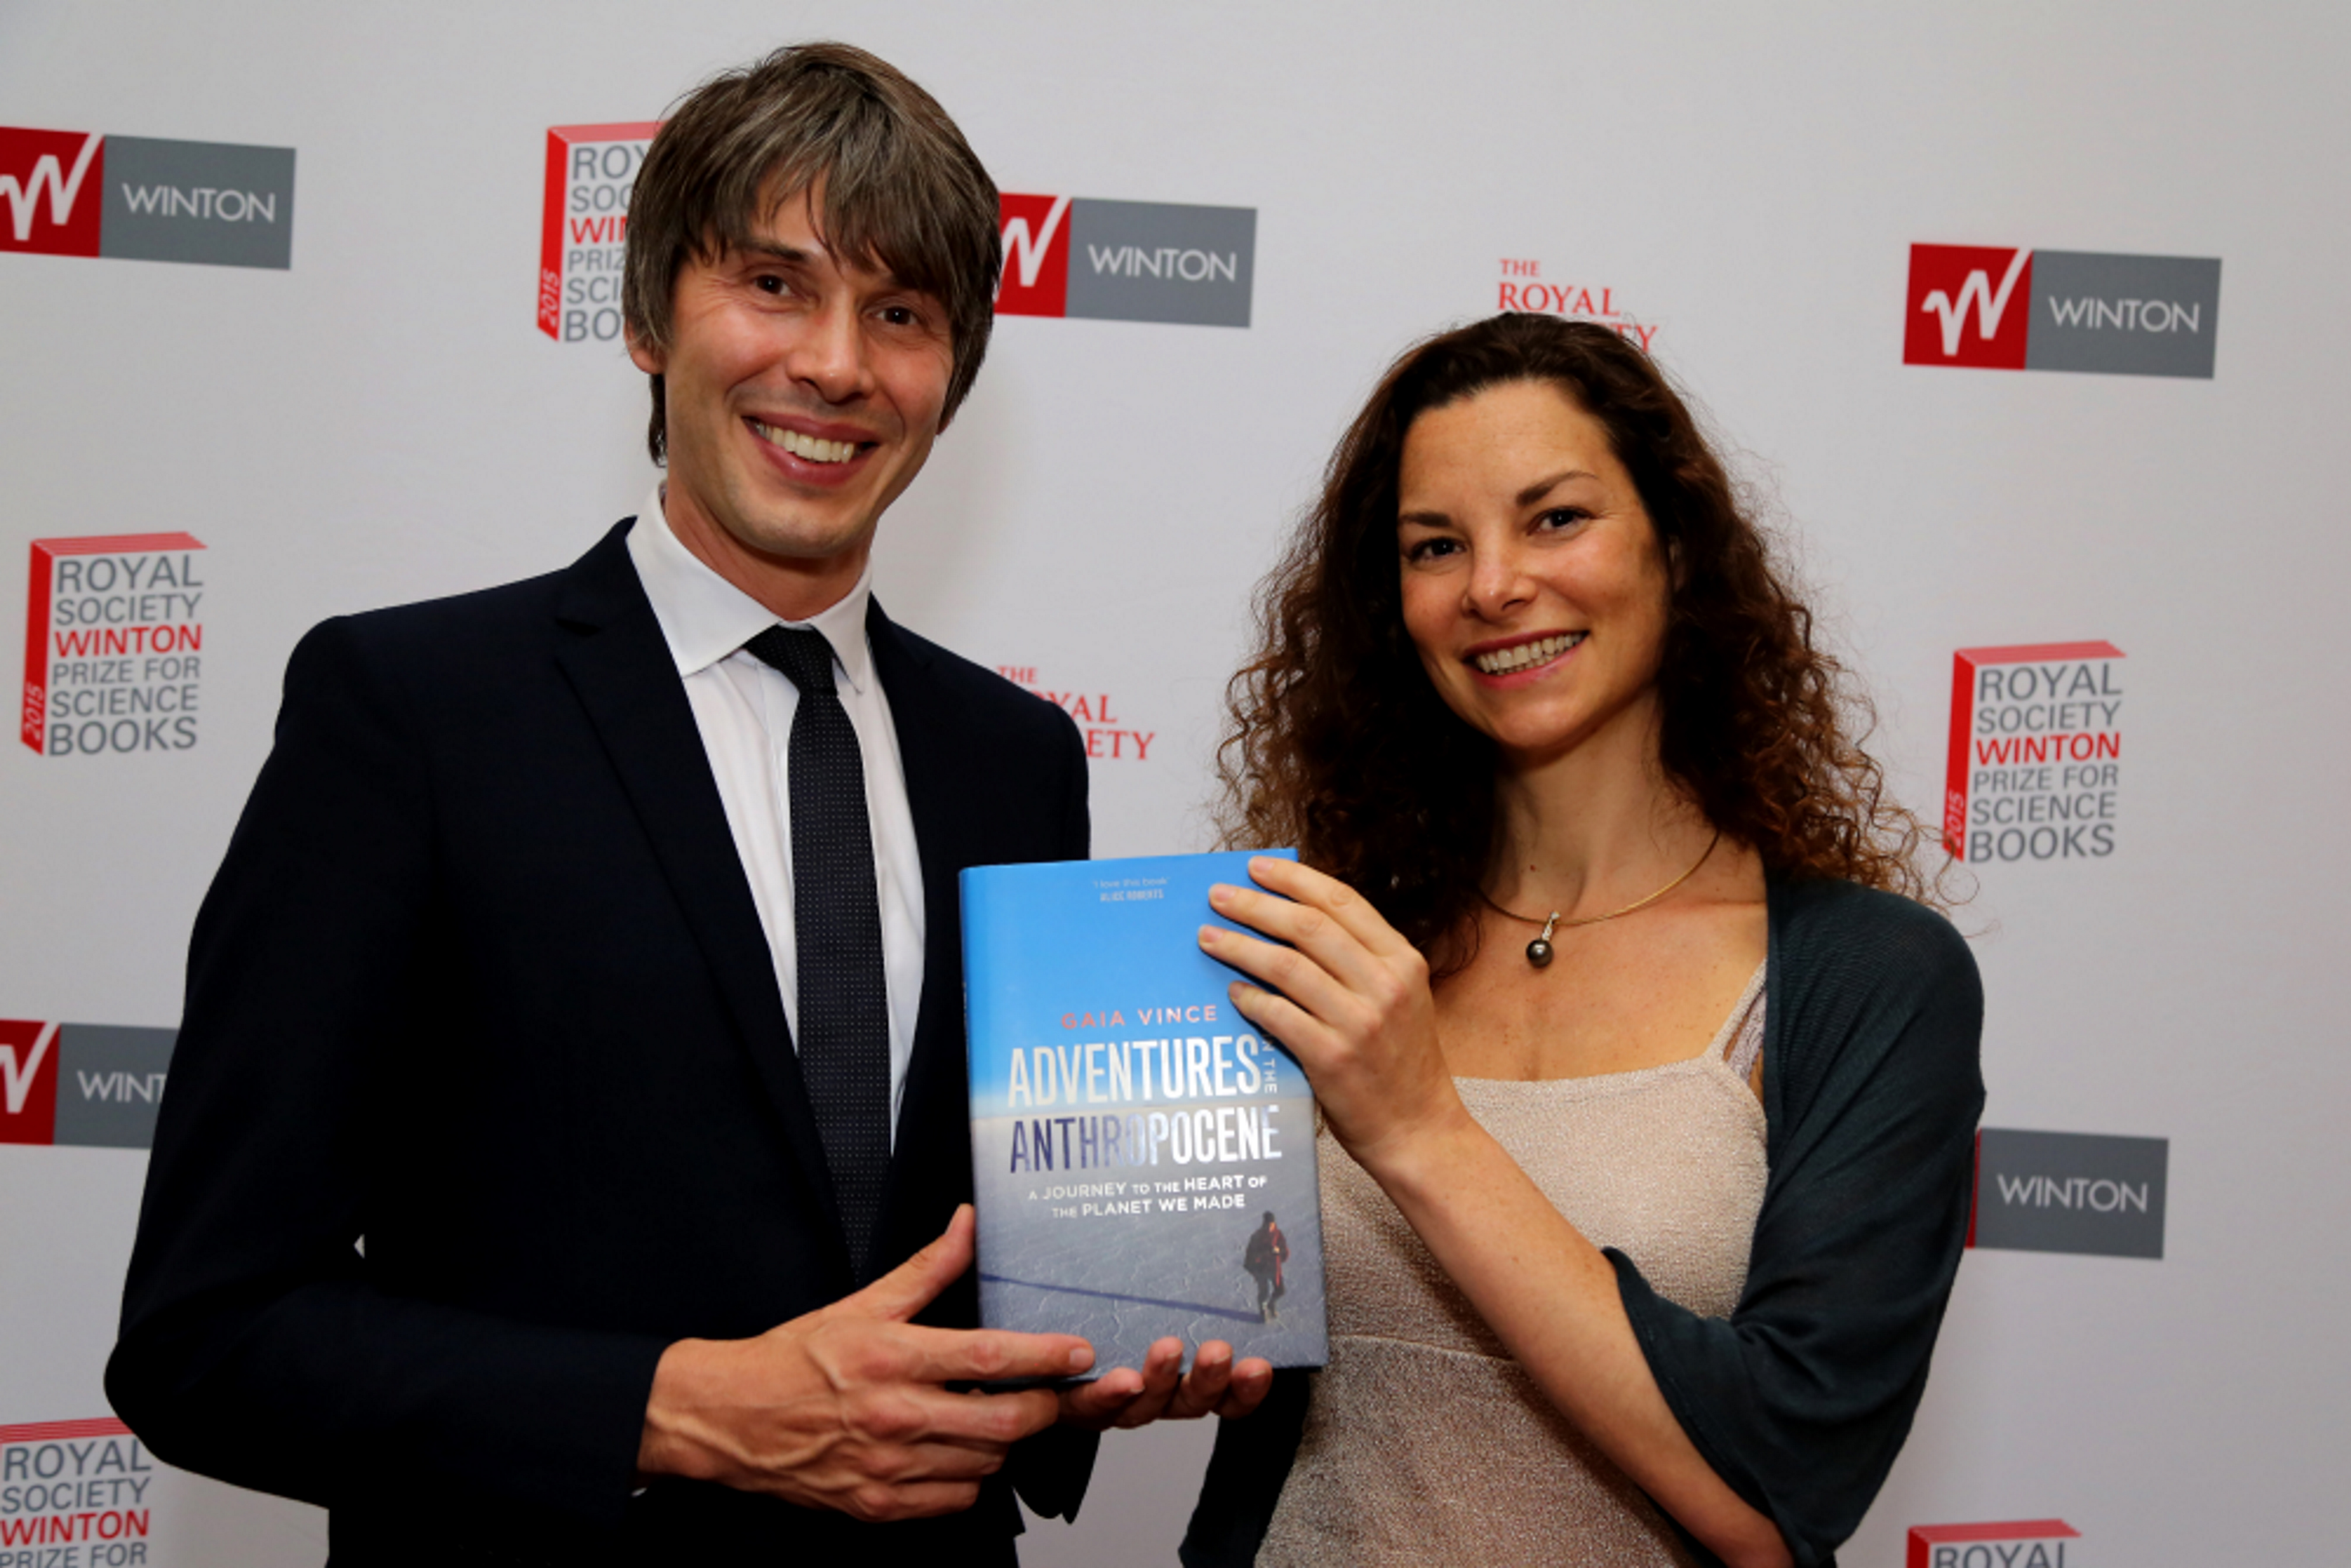 Gaia Vince poses with a copy of her winning book alongside Brian Cox. 